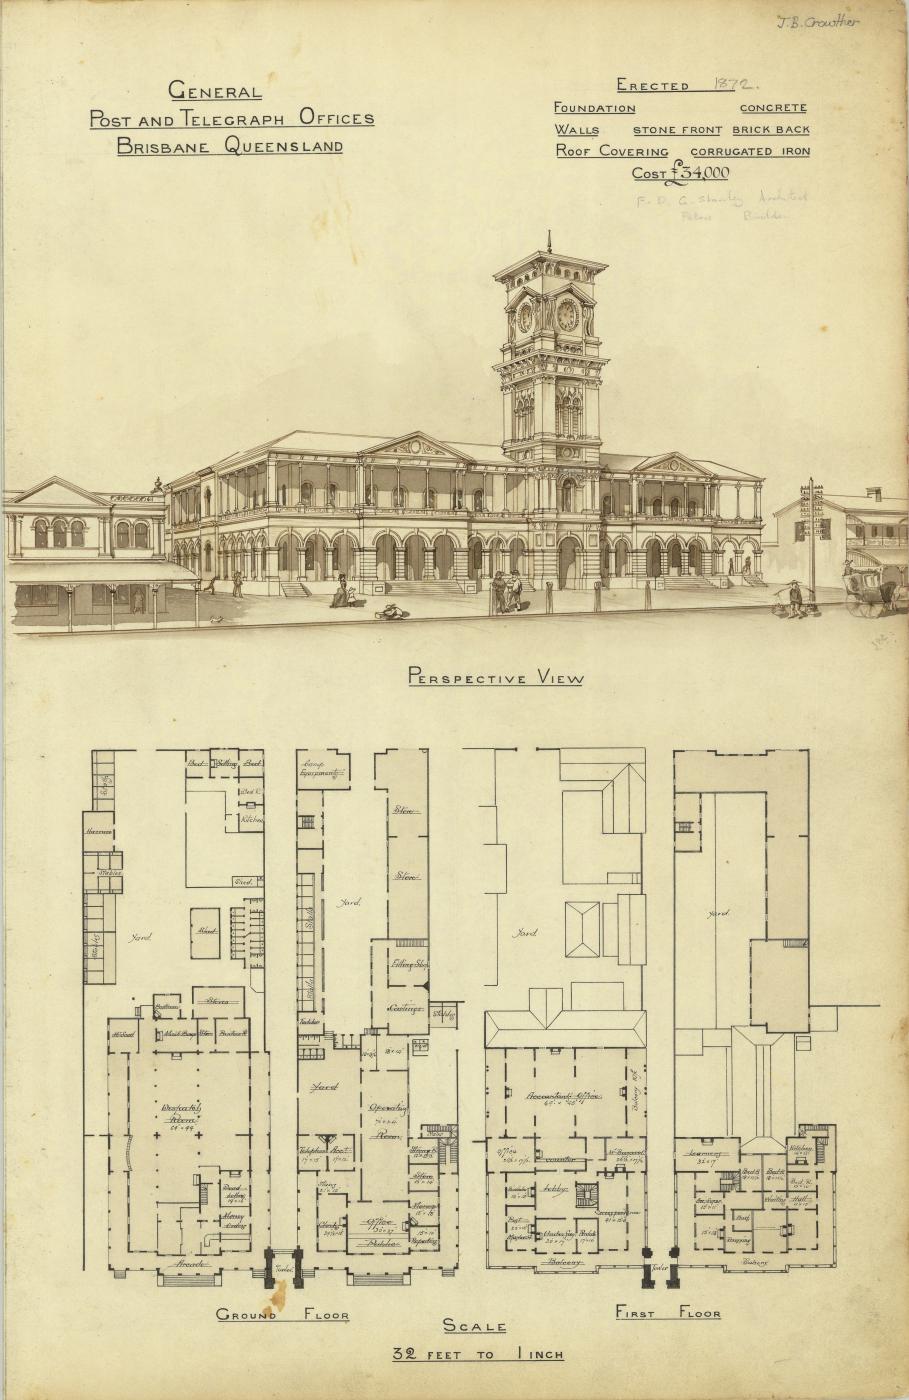 Plan of the General Post and Telegraph Offices, Brisbane